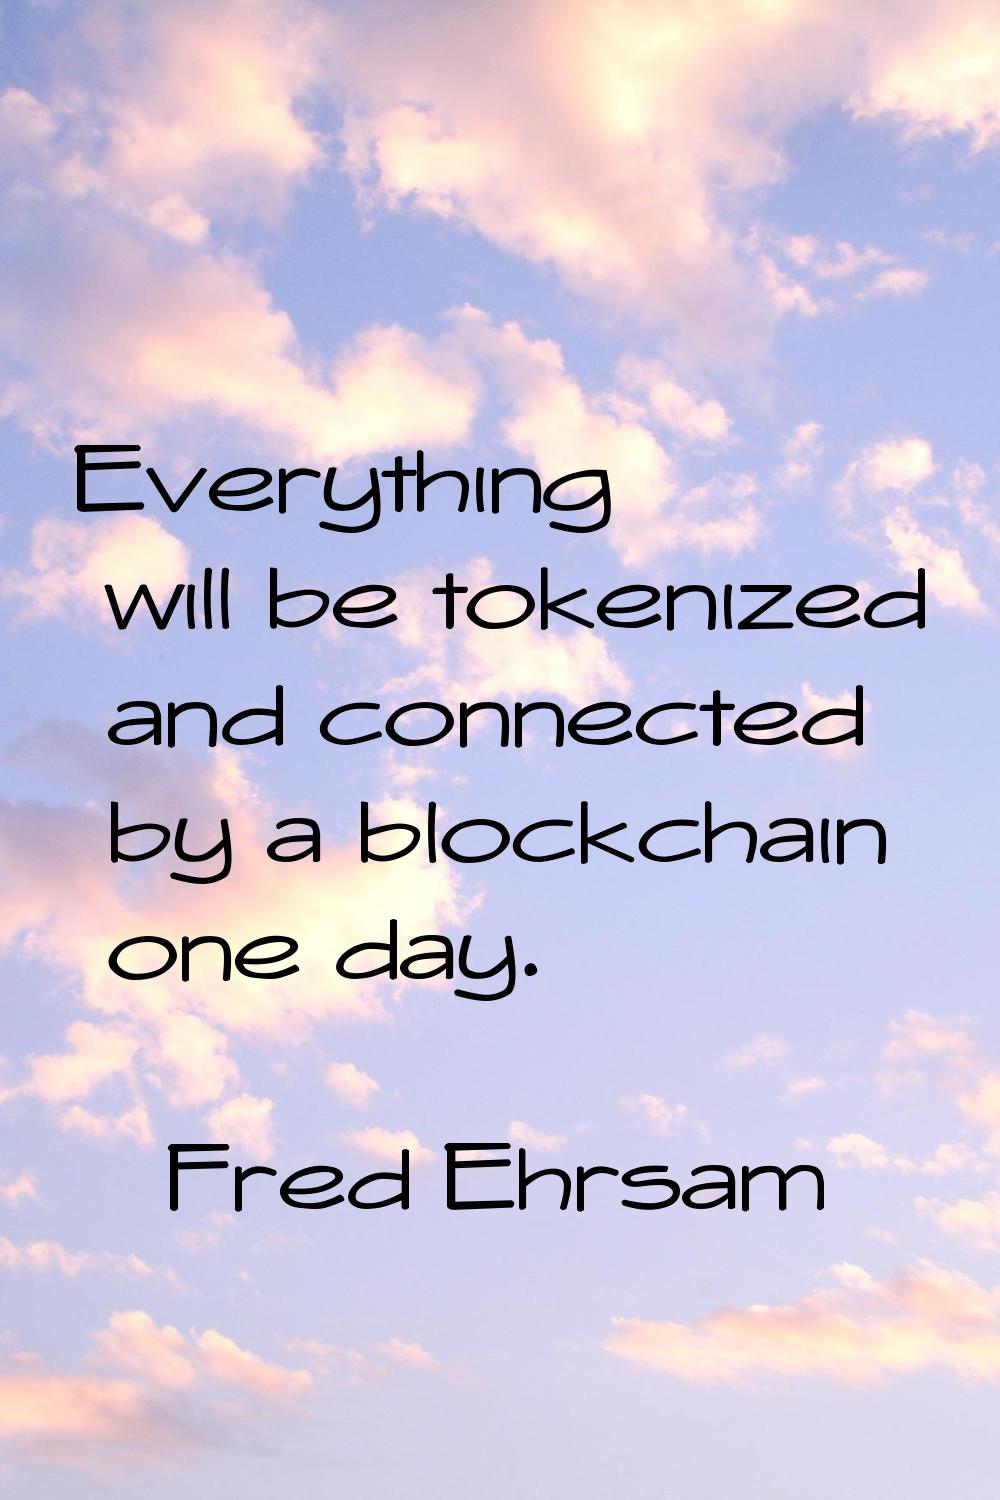 Everything will be tokenized and connected by a blockchain one day.